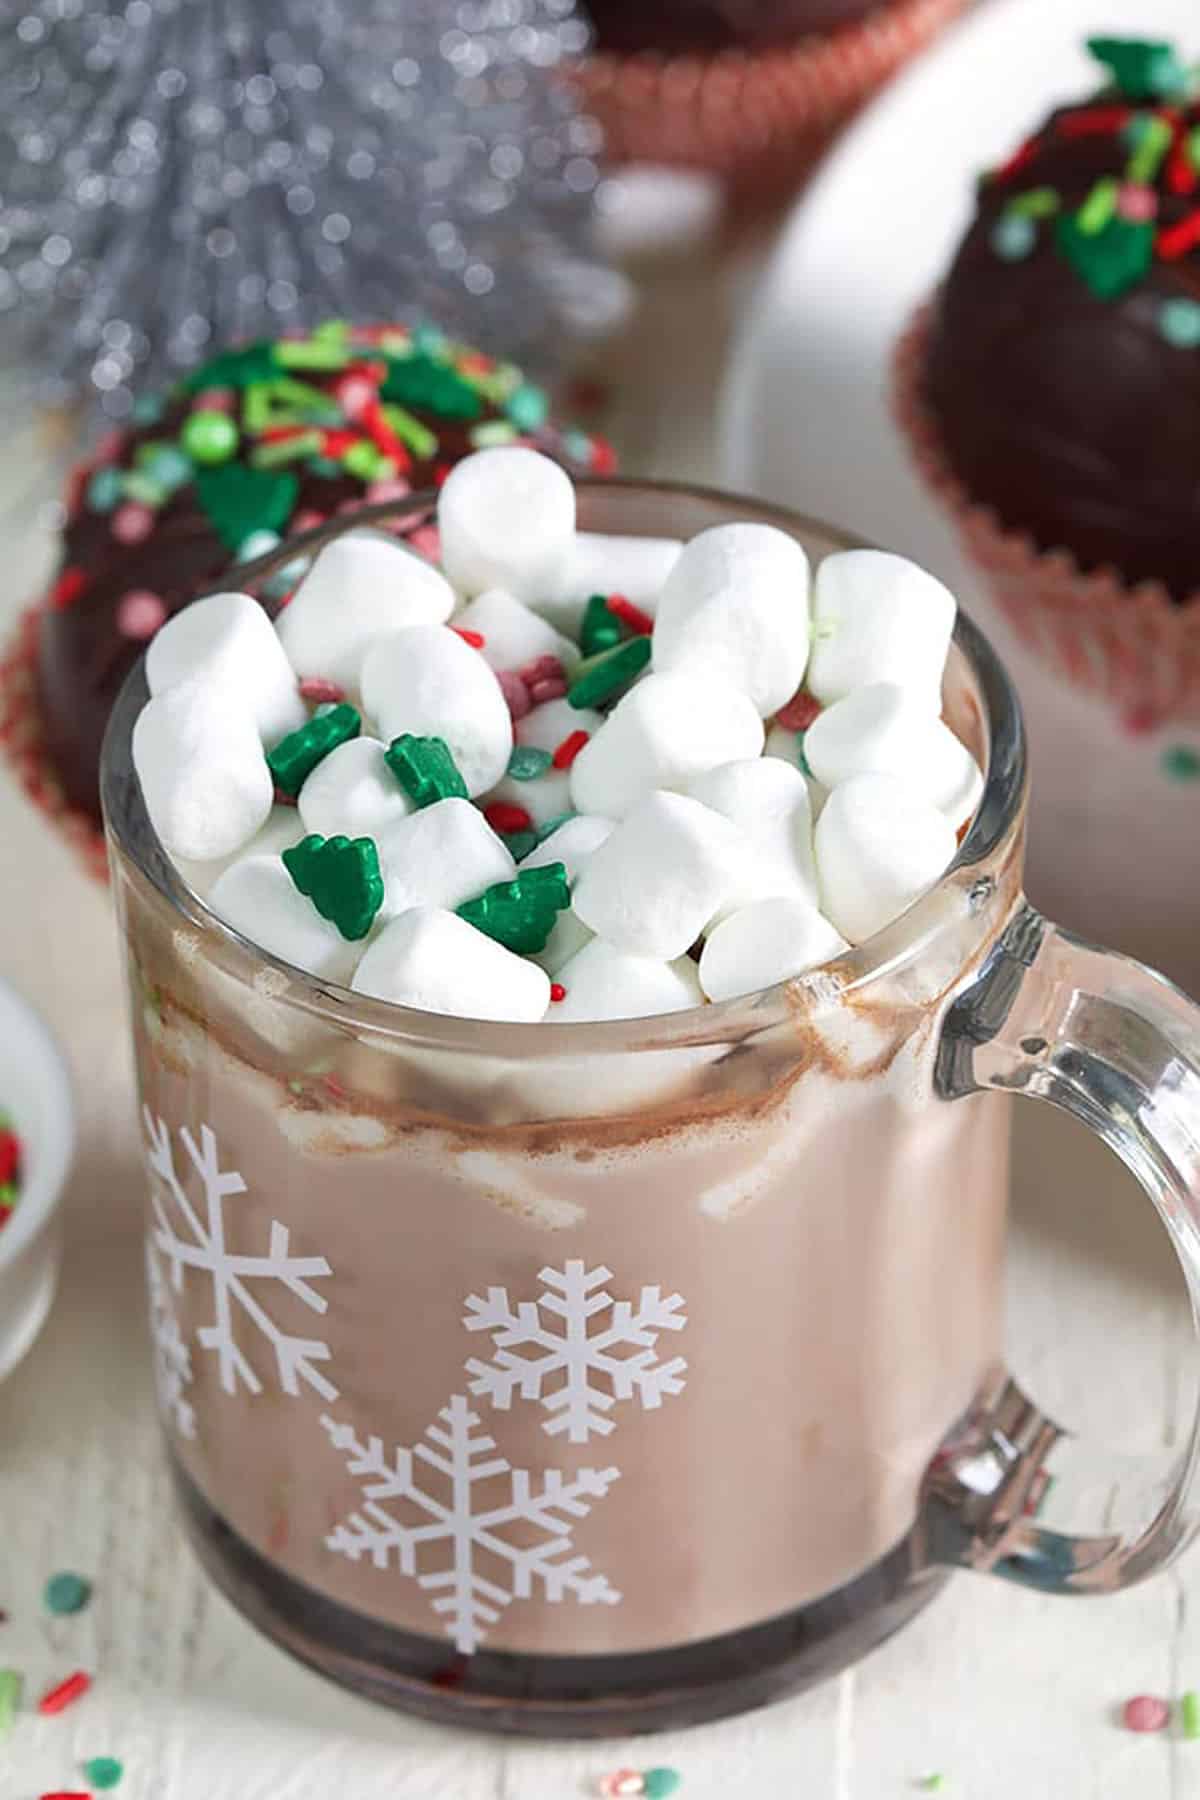 Hot chocolate in a glass mug with marshmallows on top.